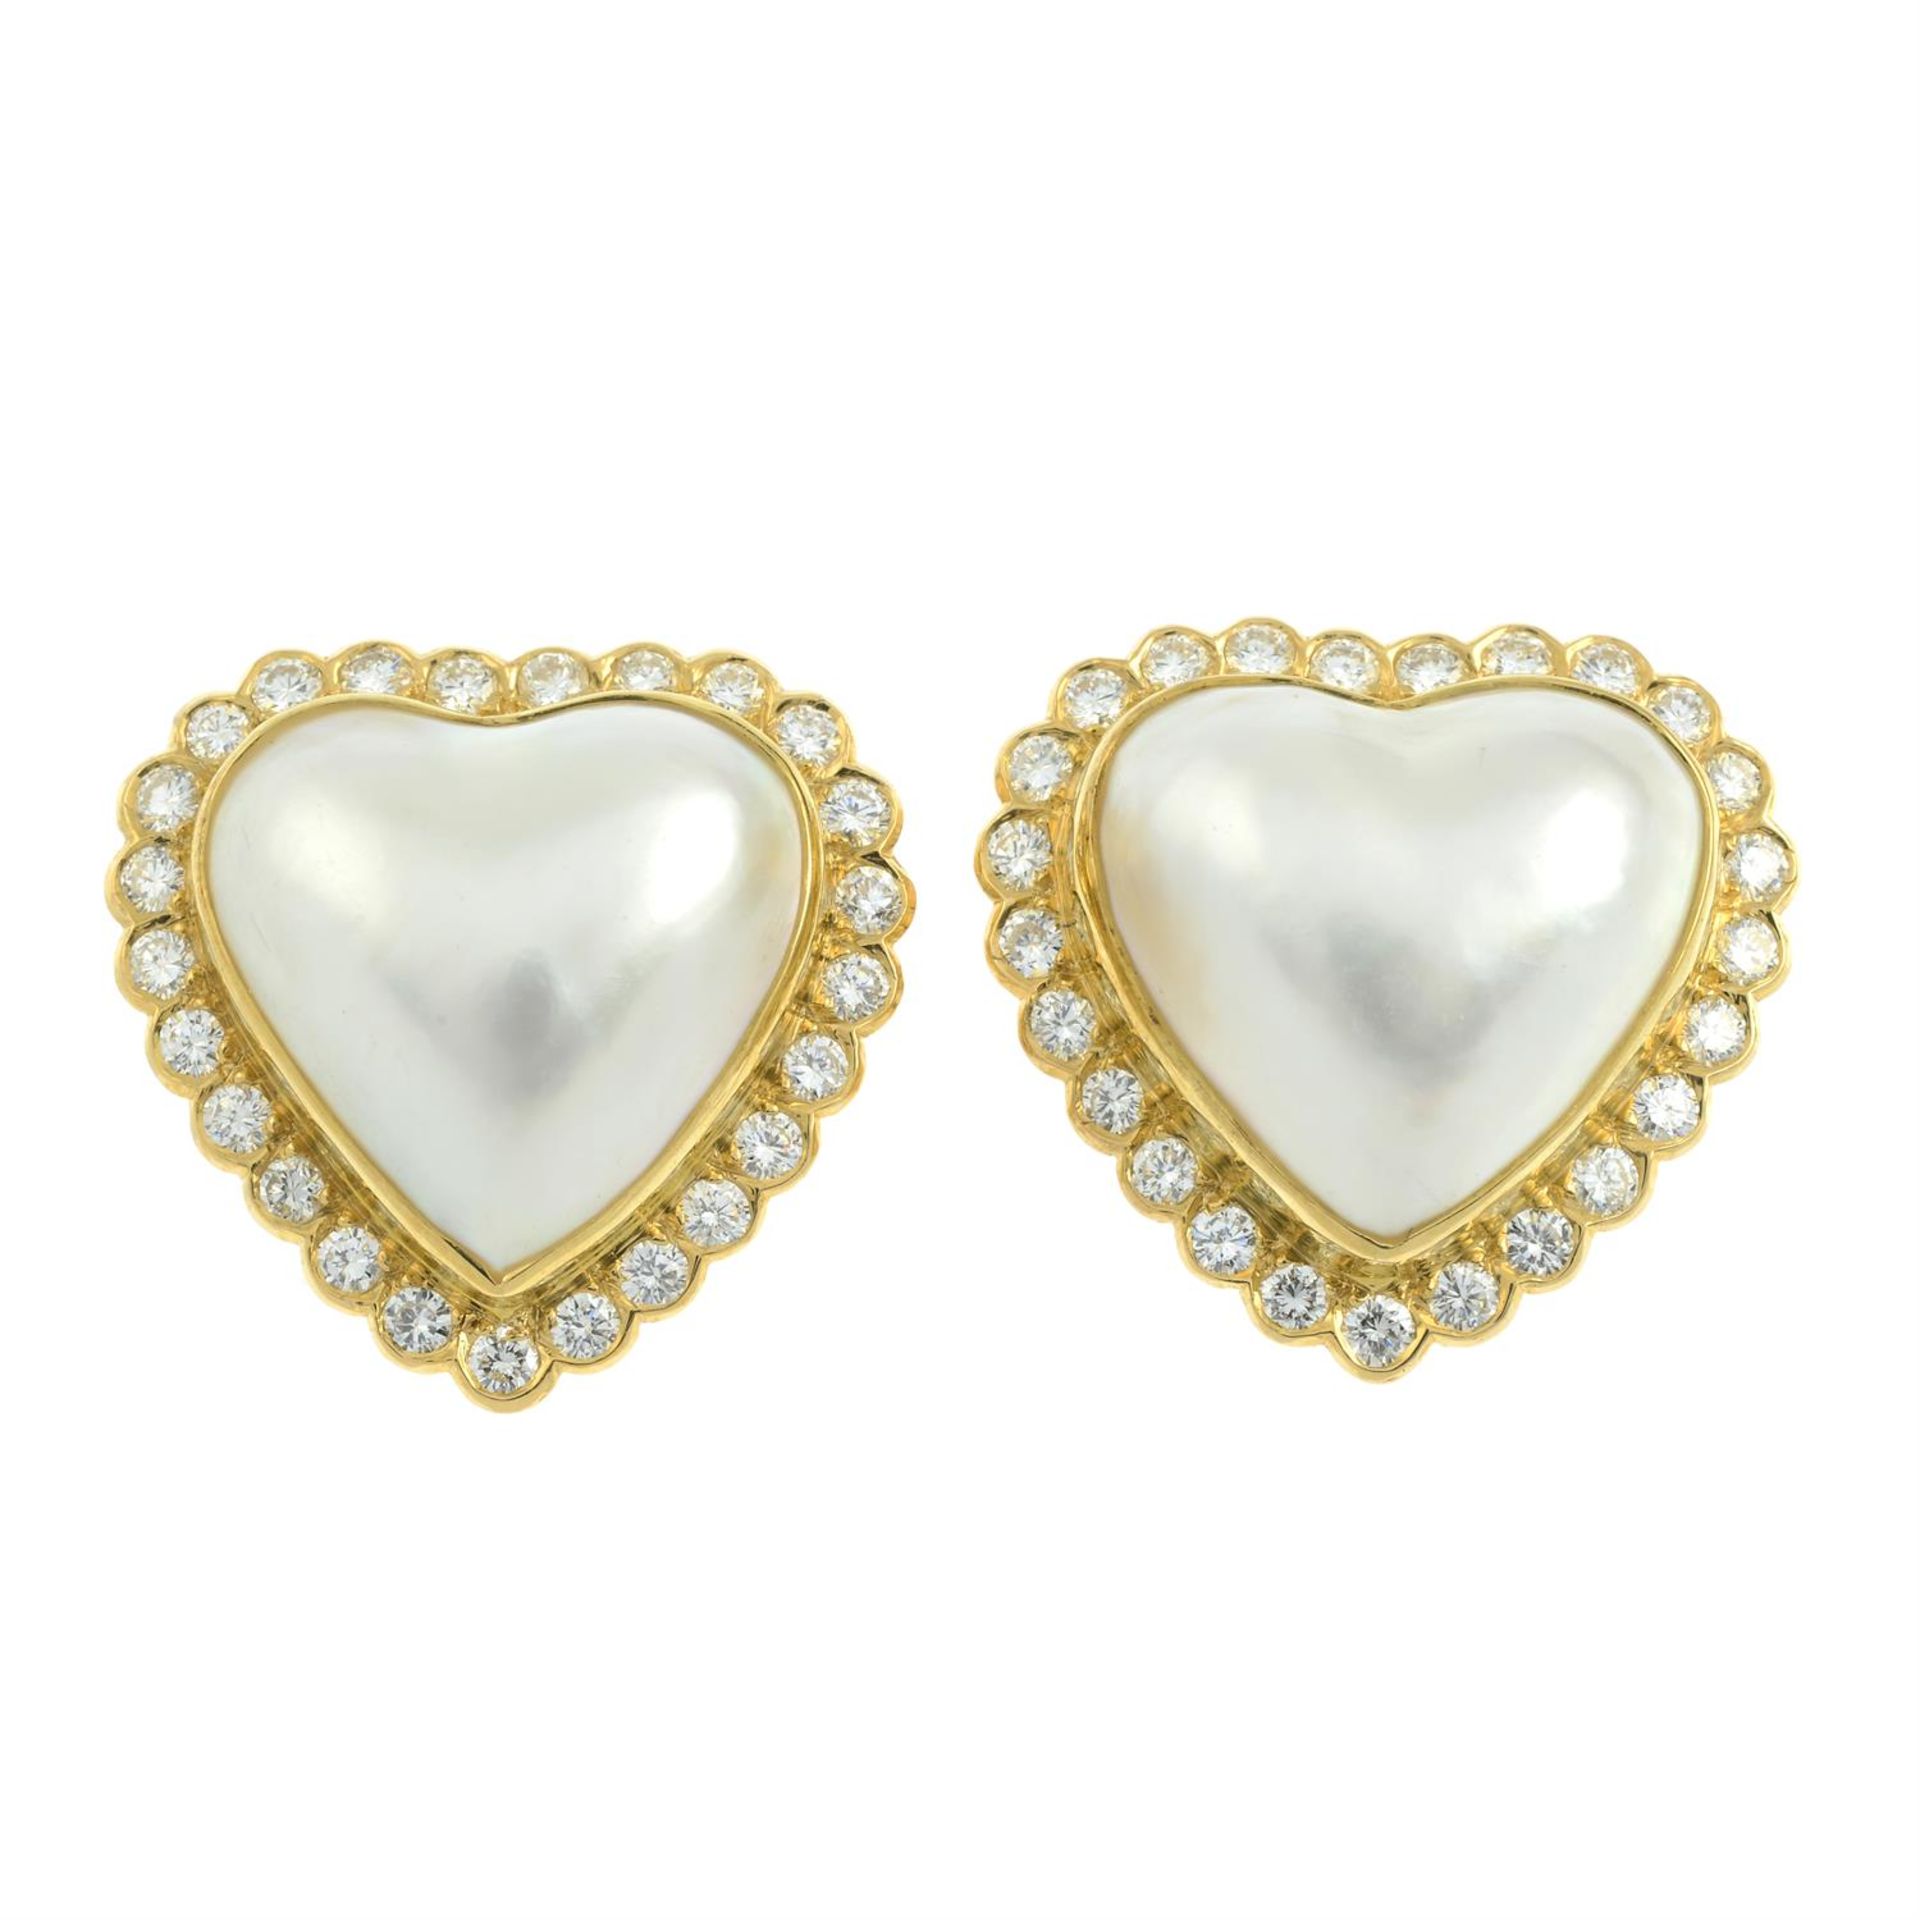 A pair of 18ct gold brilliant-cut diamond mabé pearl heart earrings, by Boodles and Dunthorne. - Image 2 of 3